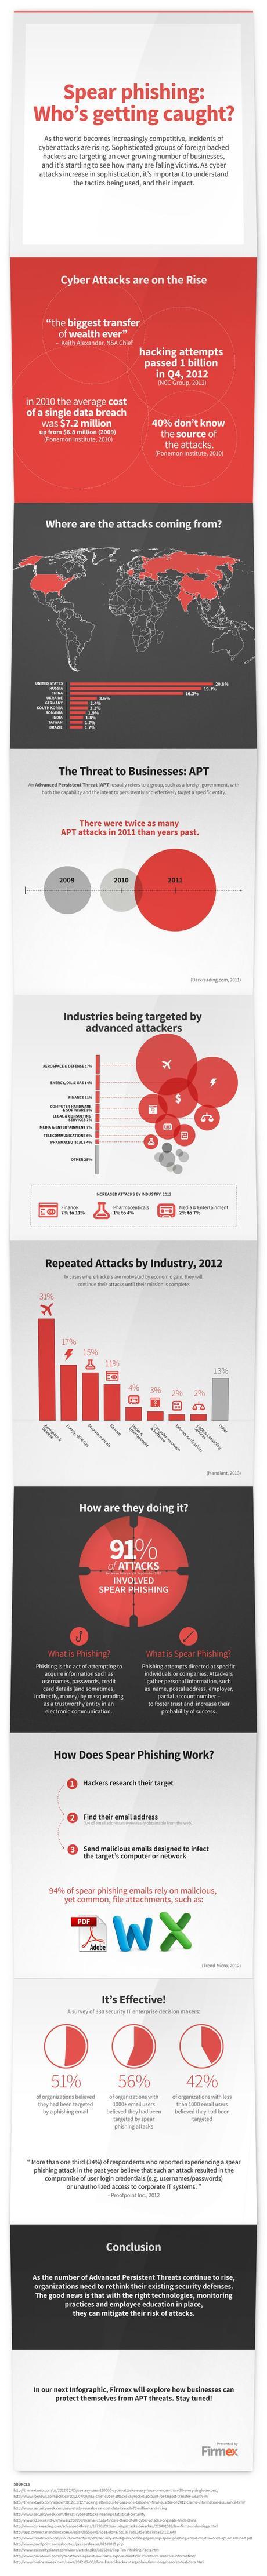 cyber_security-phishing_email-firmex-infographic_1